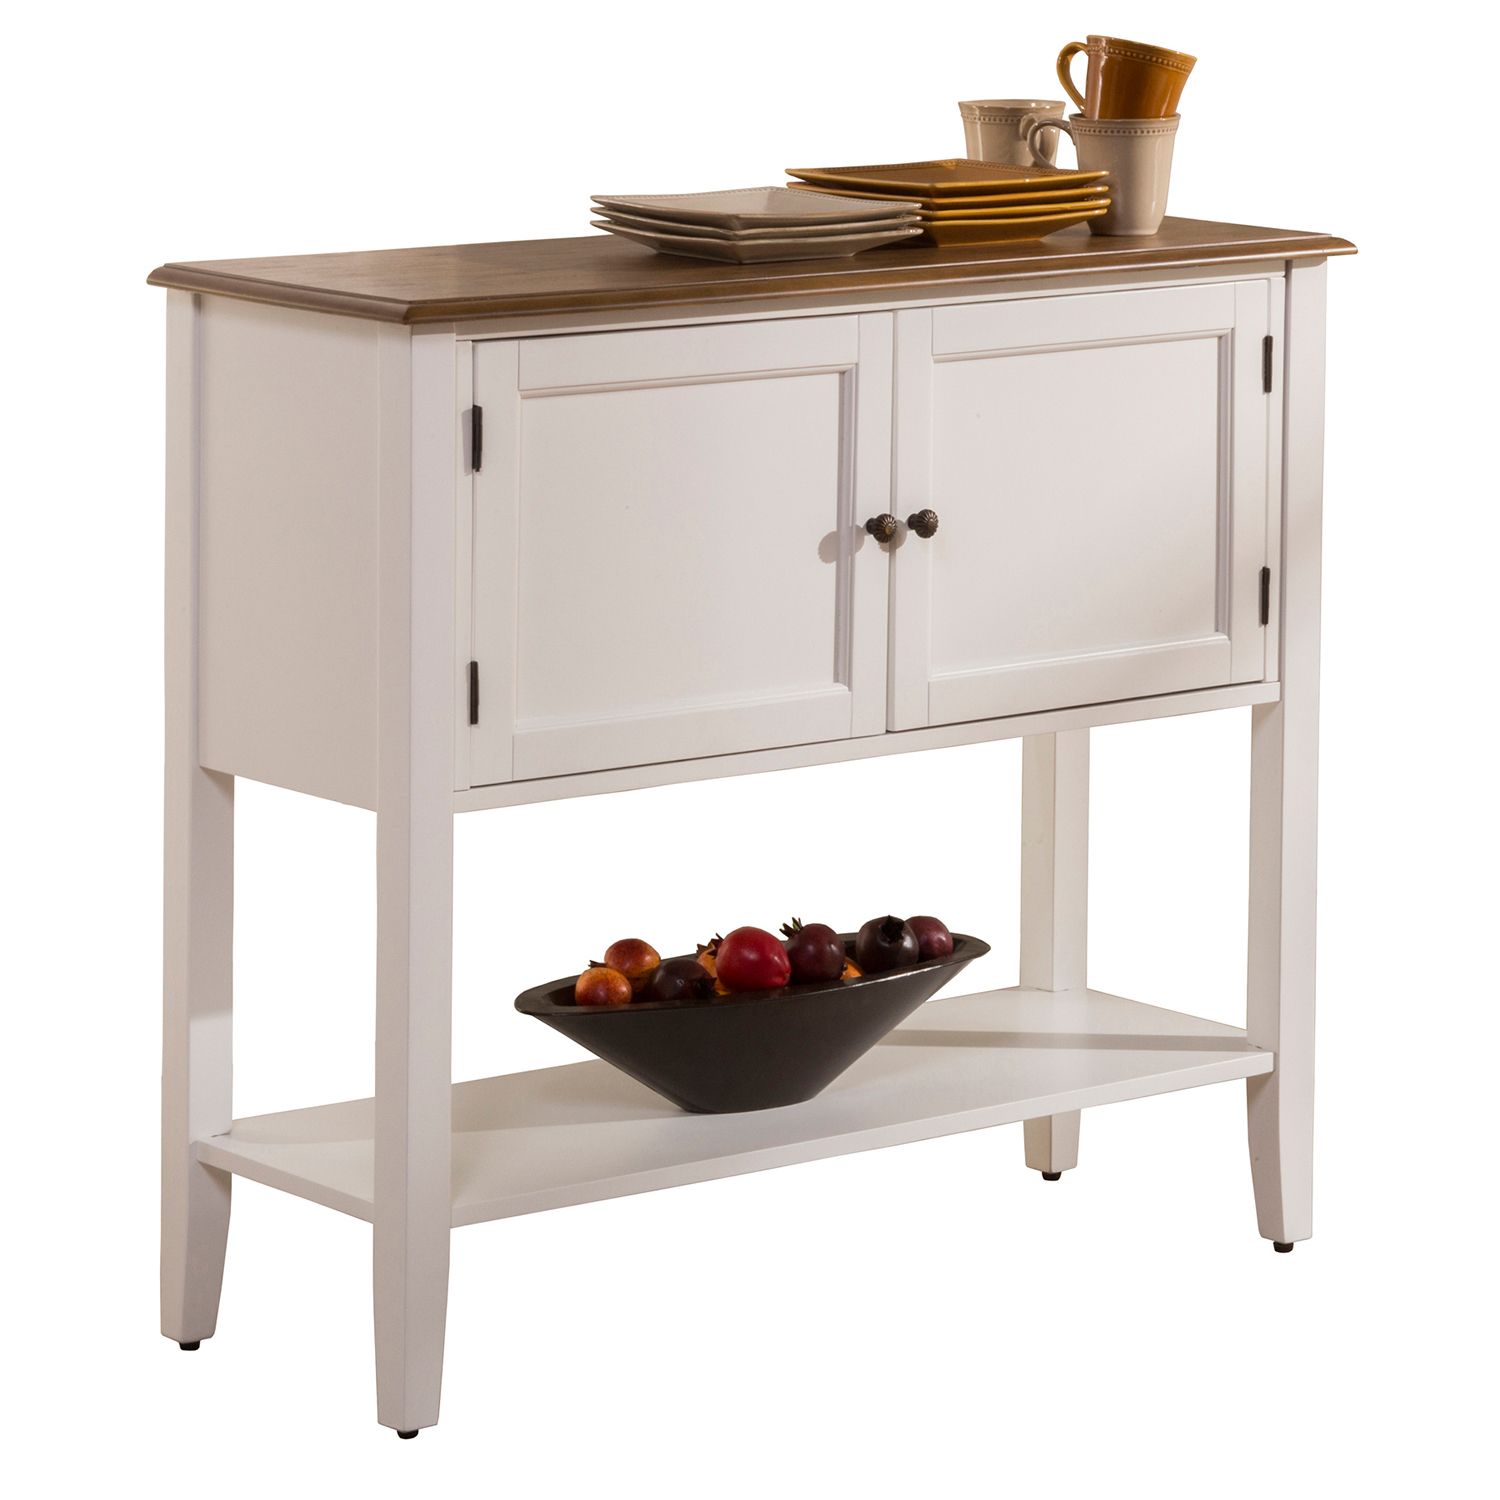 Image for Hillsdale Furniture Bayberry Embassy Buffet Table at Kohl's.